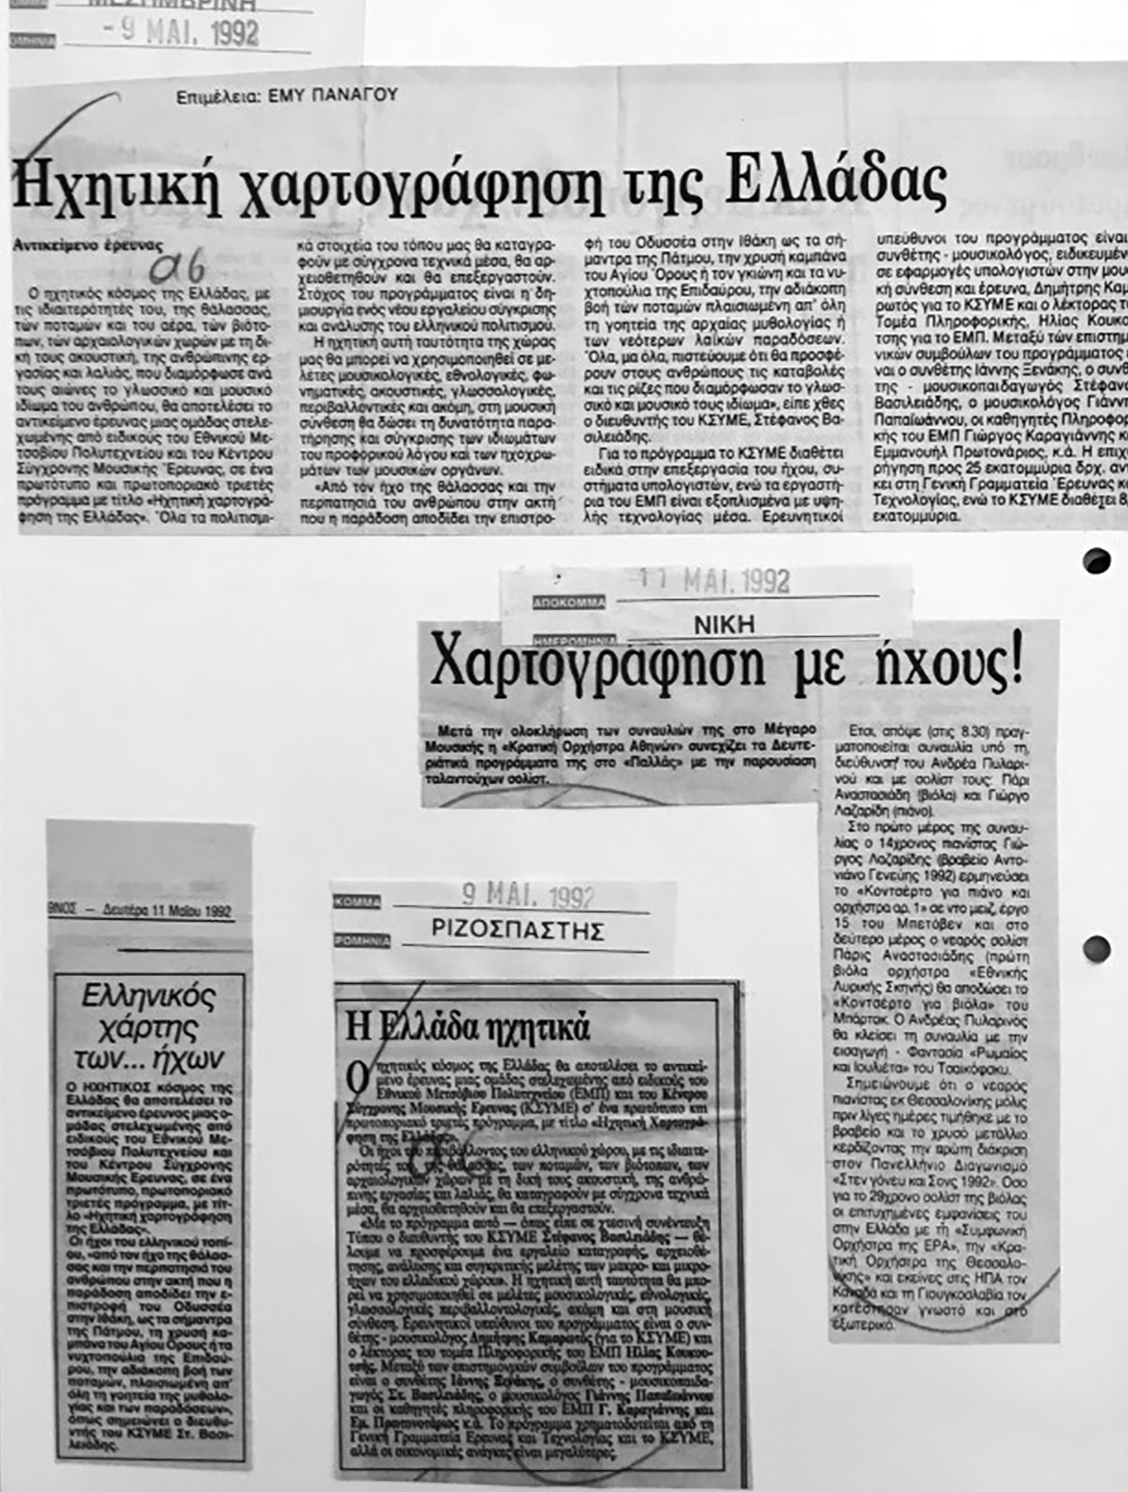 A scanned newspaper articles from May 1992 as part of the publication »From Xenakis’s UPIC to Graphic Notation Today«